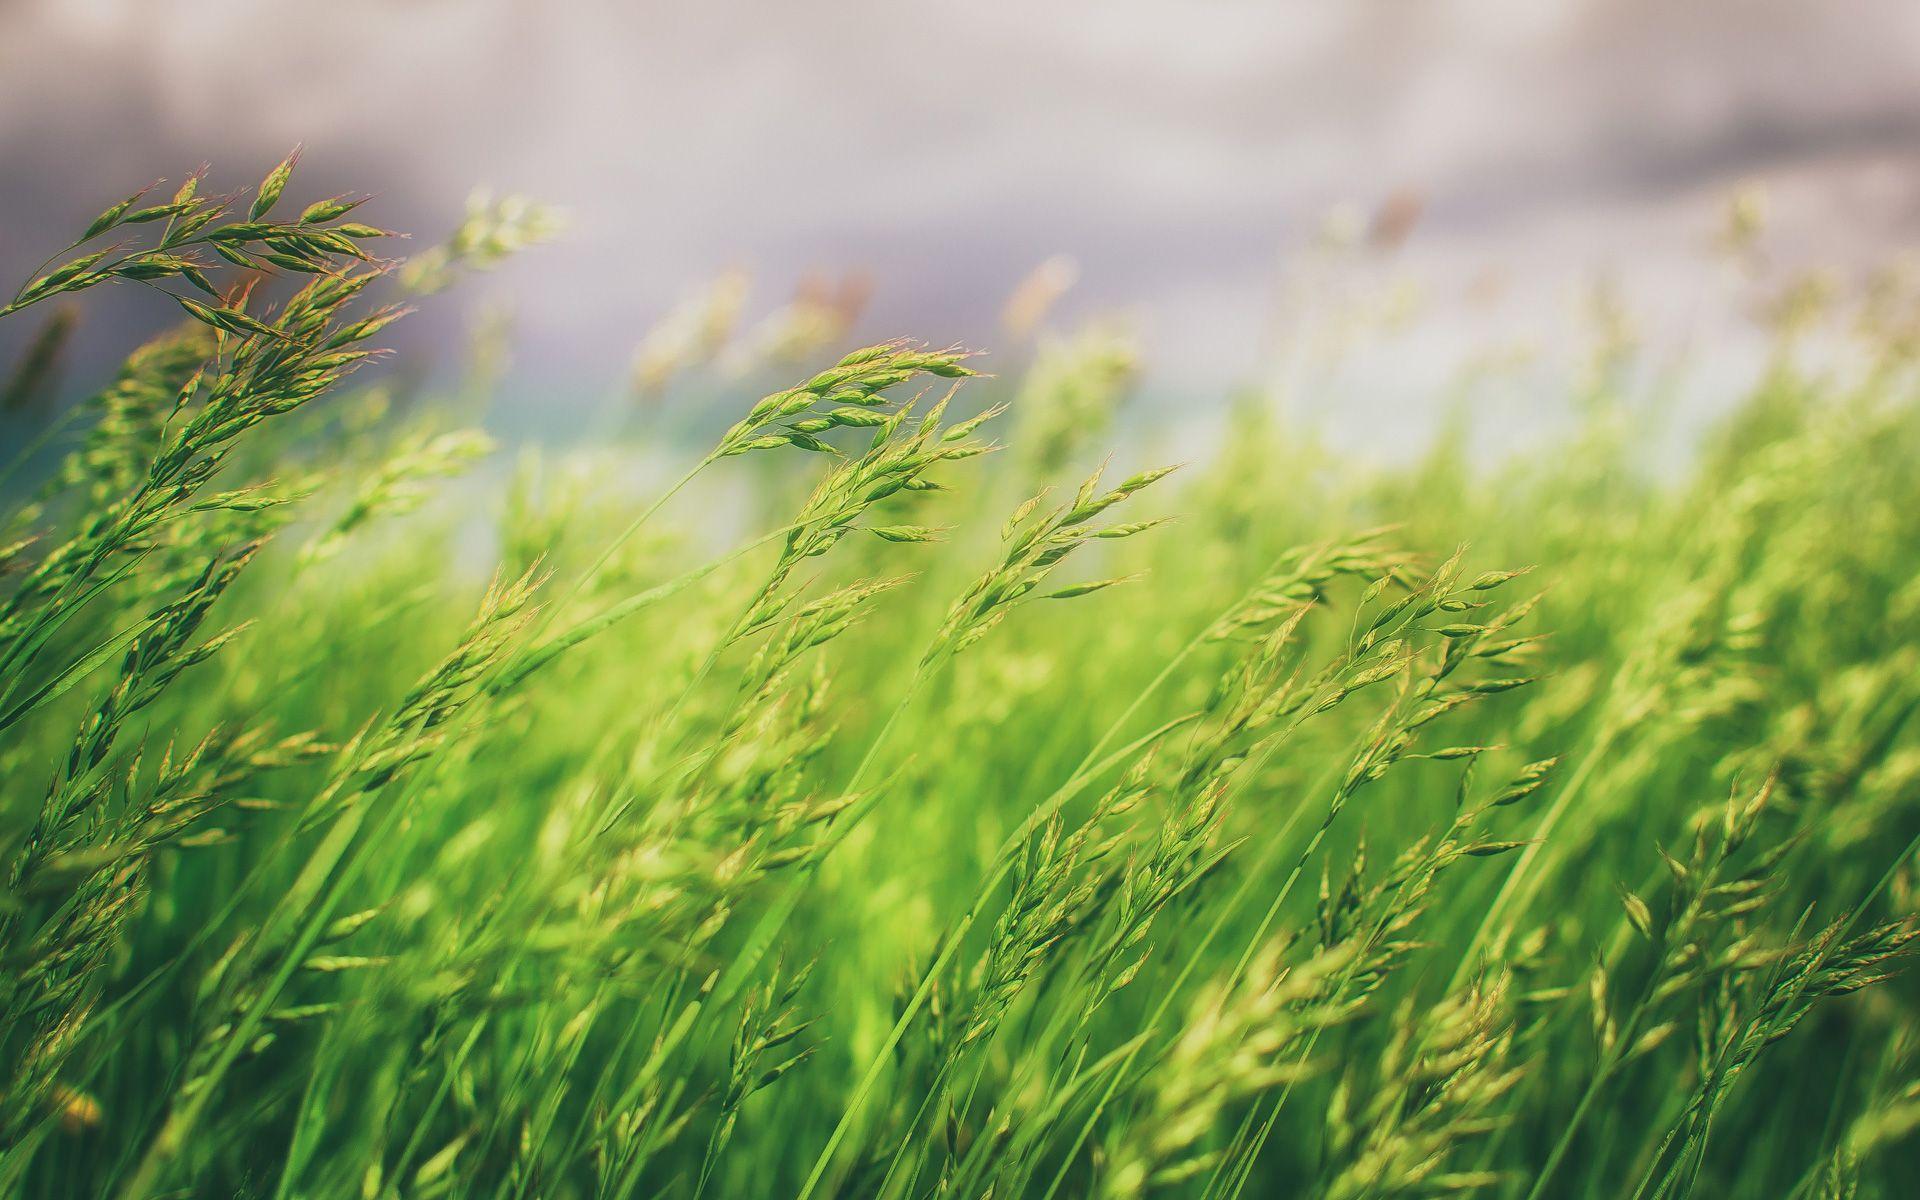 Blurred Background Grass Field. Beautiful Places. Nature wallpaper